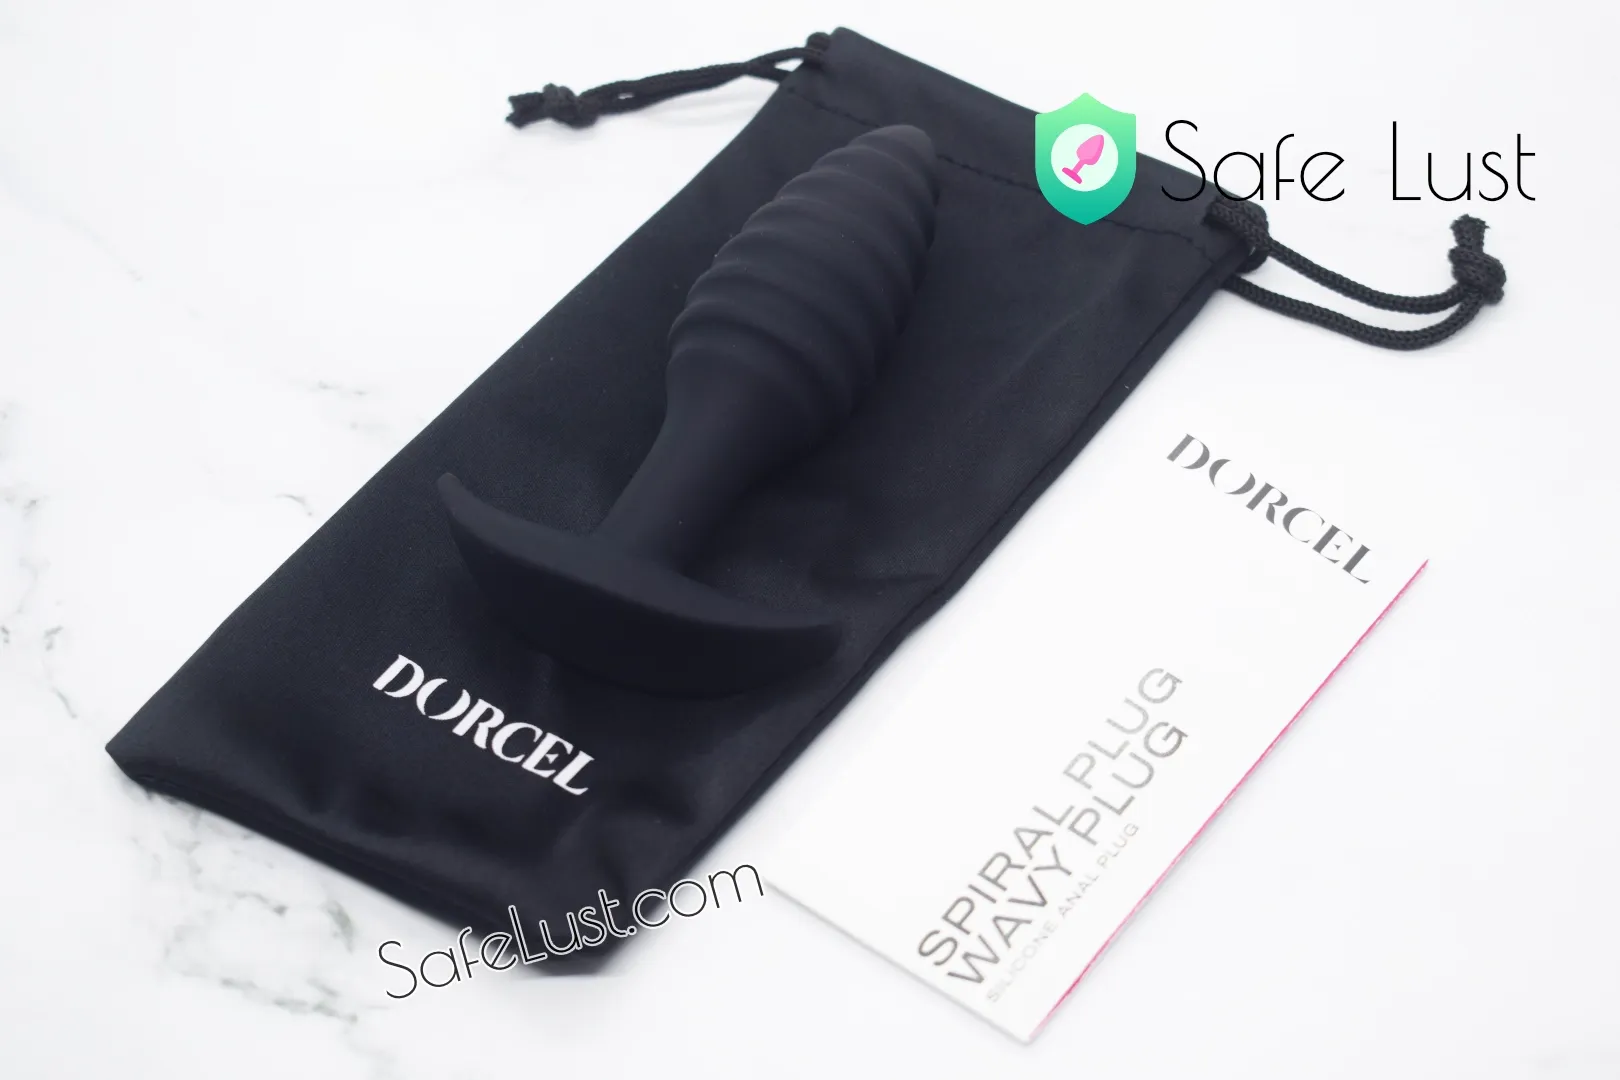 The Dorcel Spiral plug and its included storage pouch and user manual